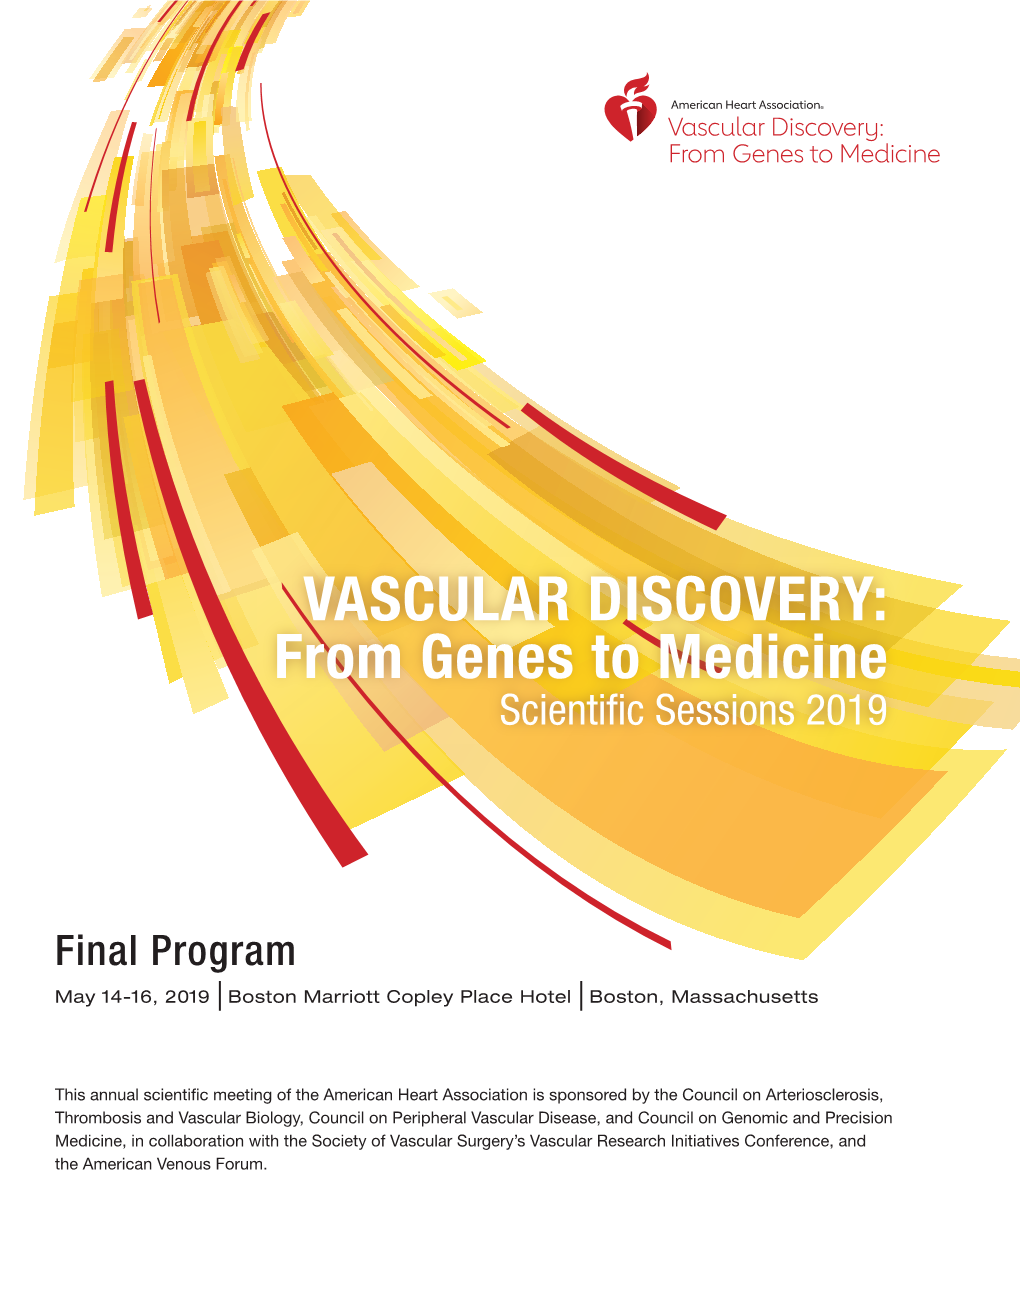 Vascular Discovery: from Genes to Medicine 2019 Scientific Sessions